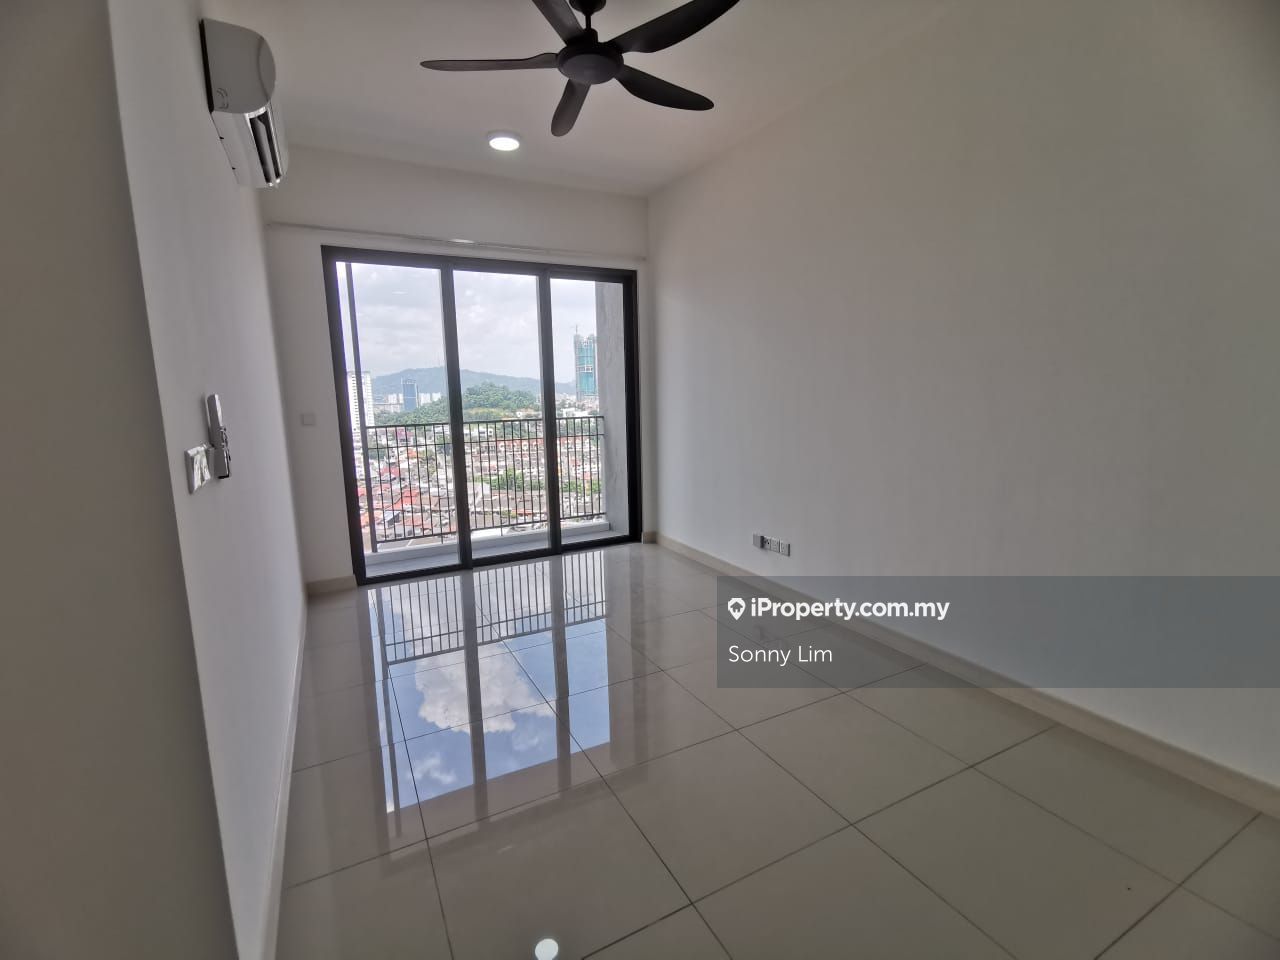 Aster Green Serviced Residence 3 bedrooms for rent in Sri Petaling ...